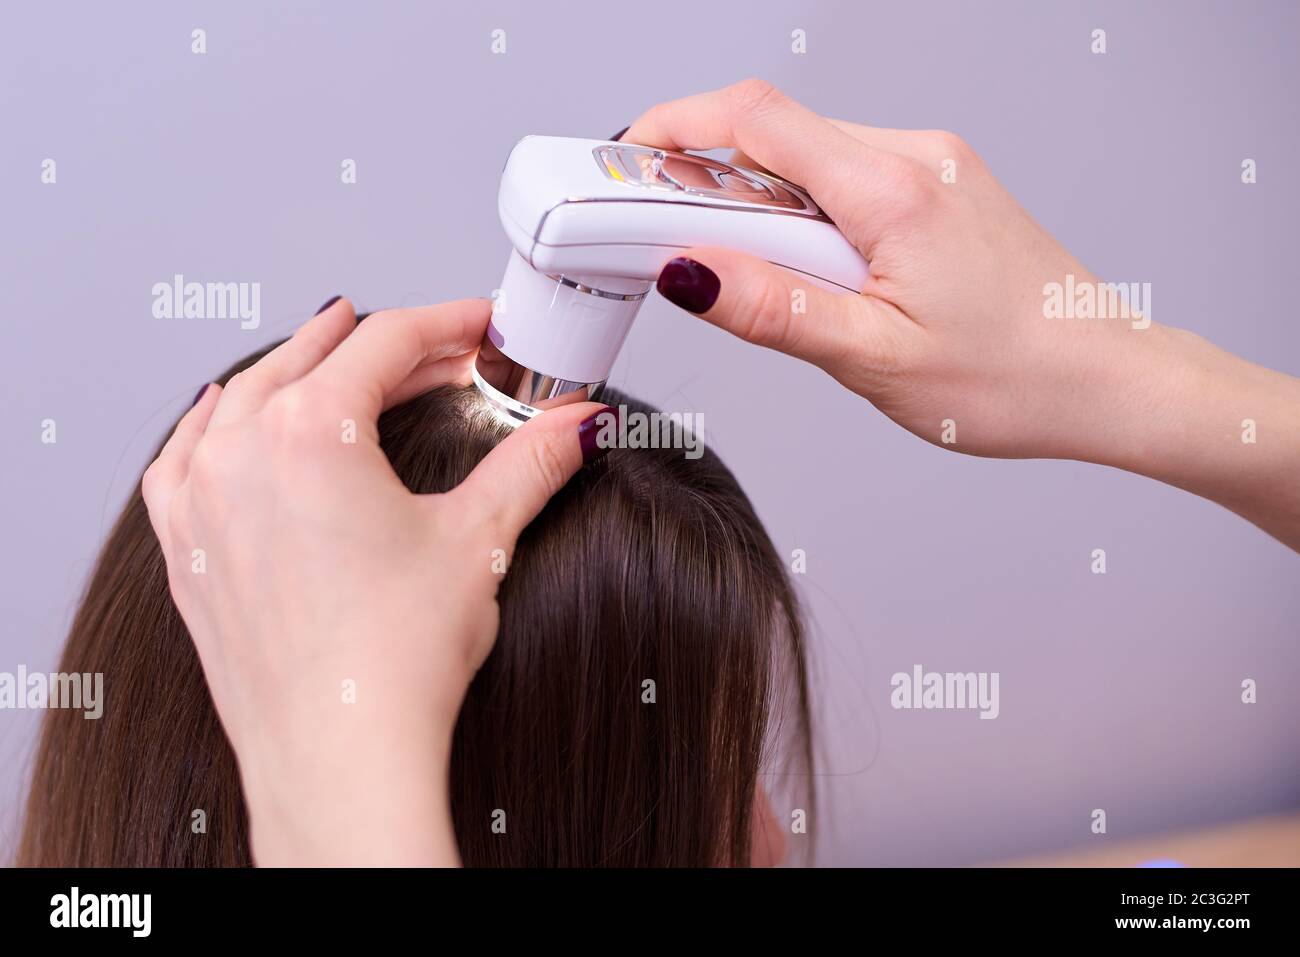 7. The Role of Methyl Blue in Microscopic Examination of Hair Damage - wide 8